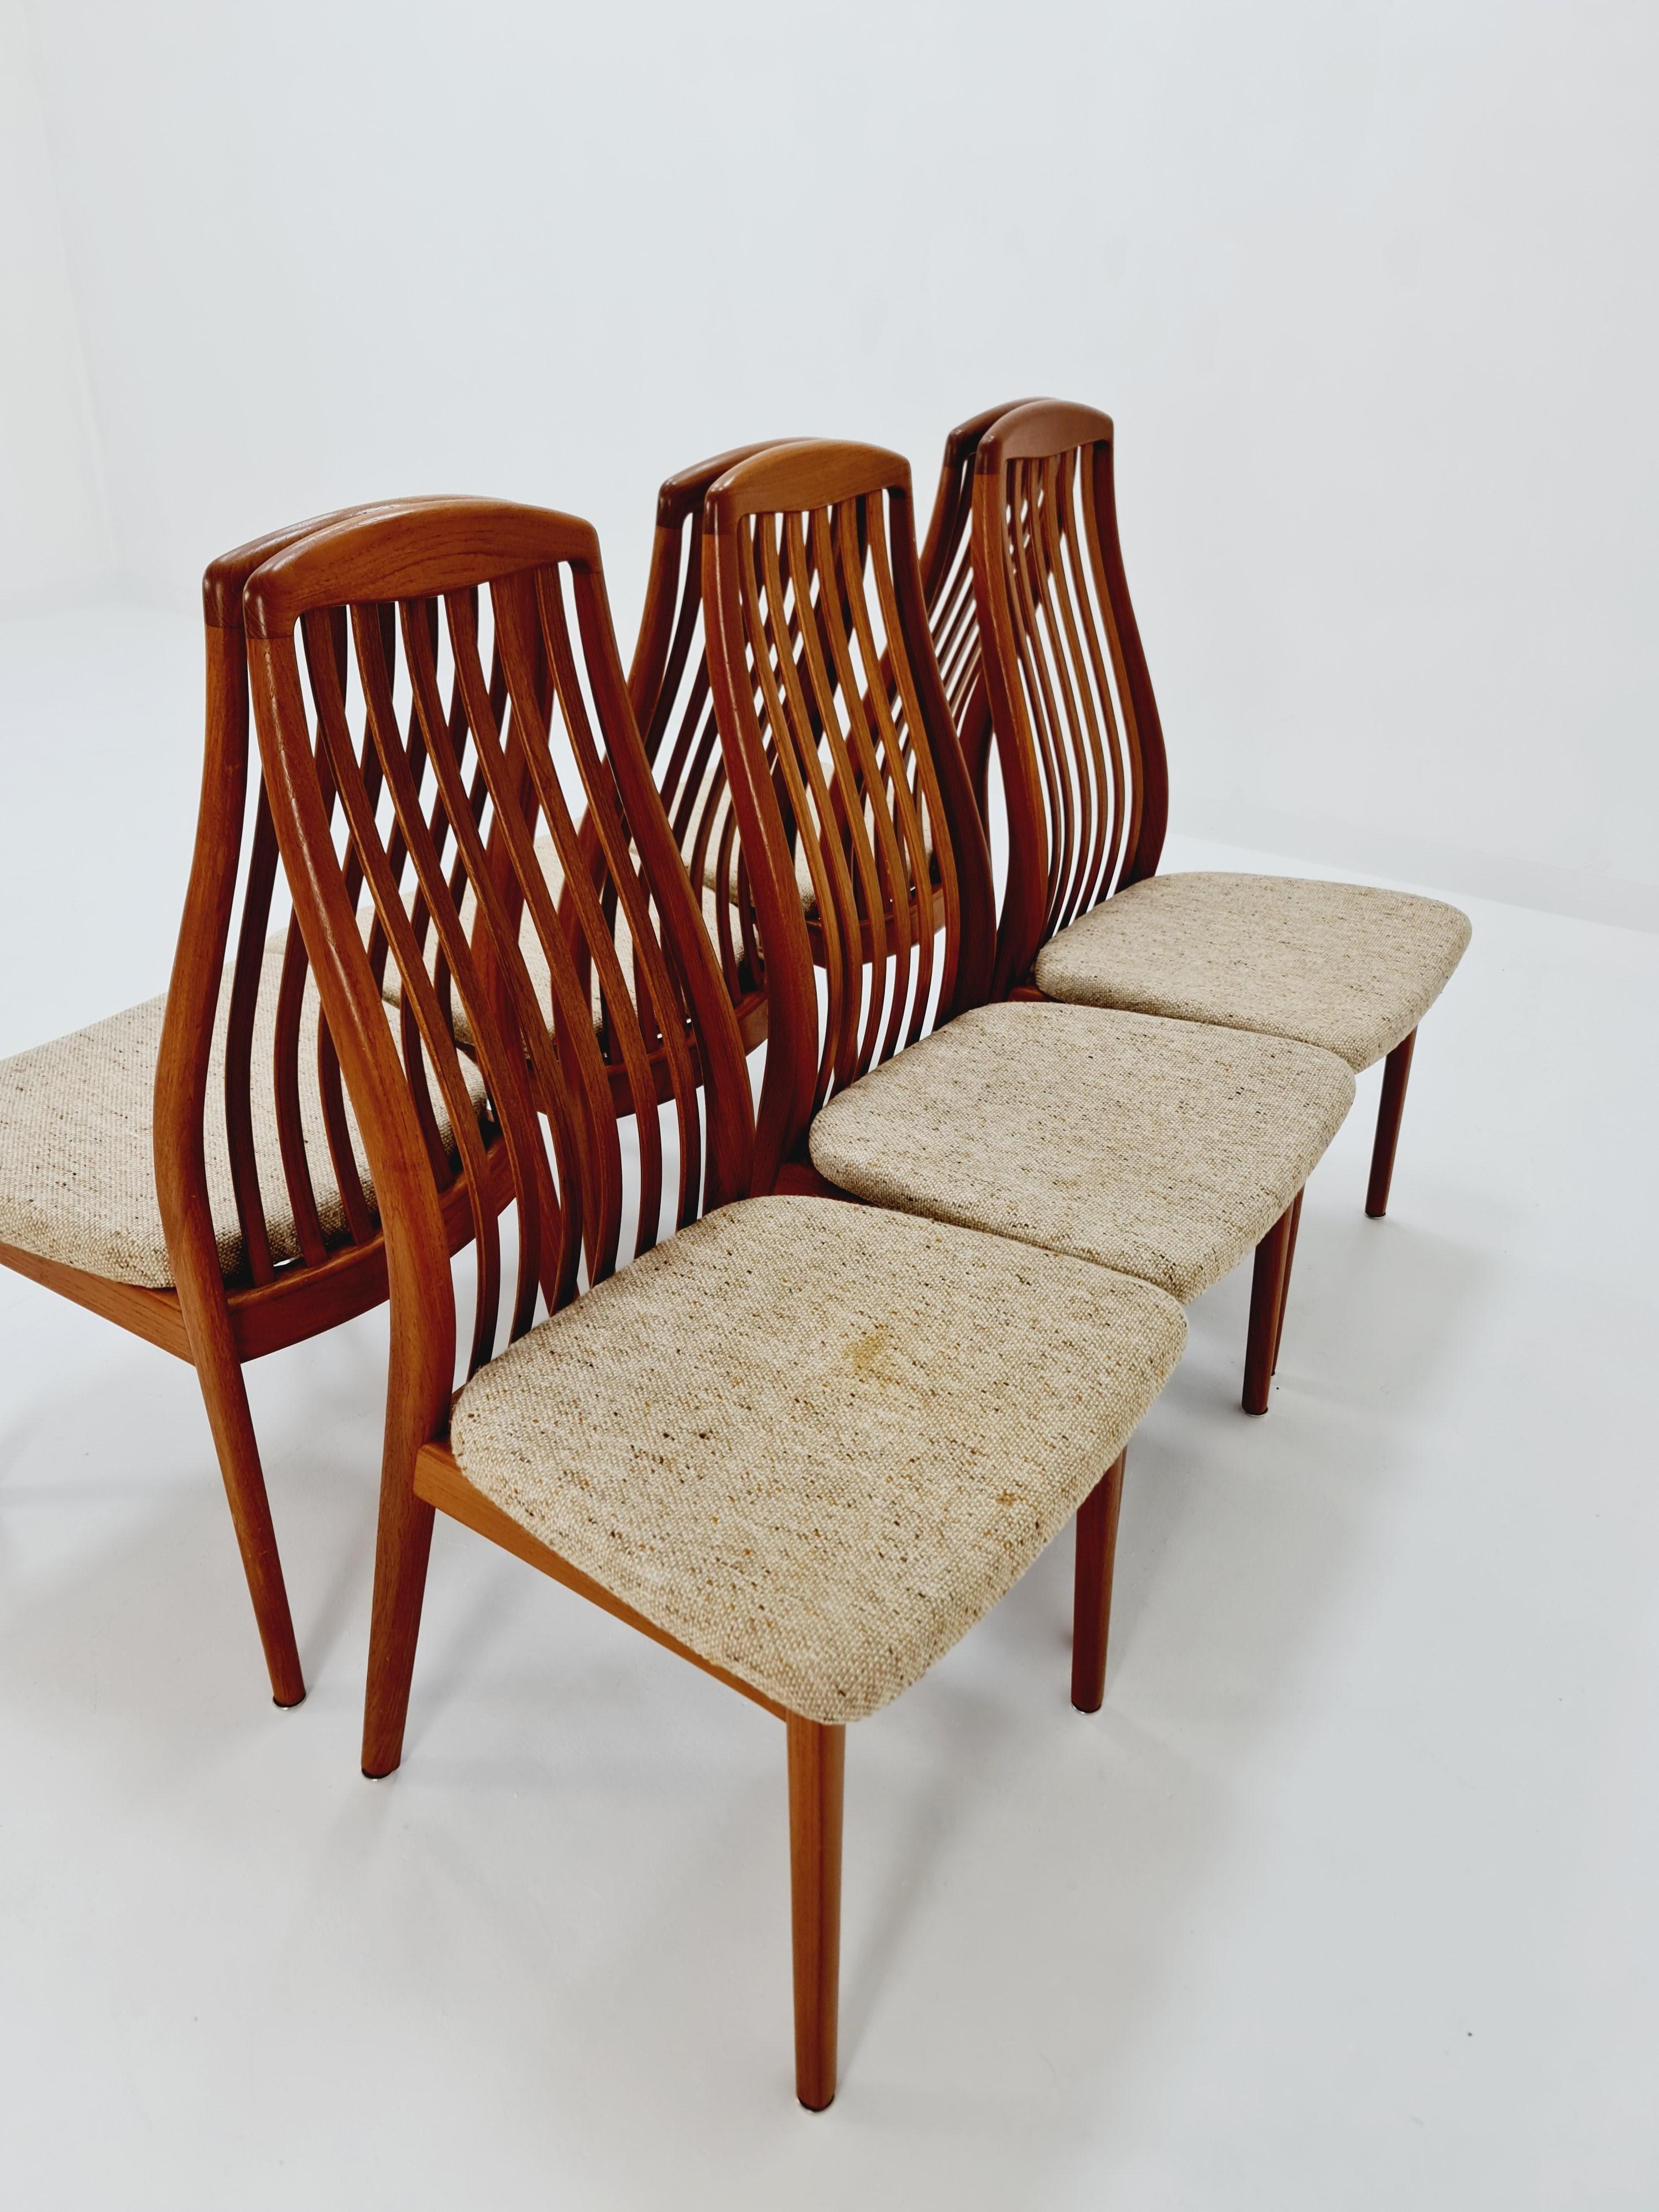 Danish teak dining chairs by Schou Andersen 1960s, set of 6 For Sale 5